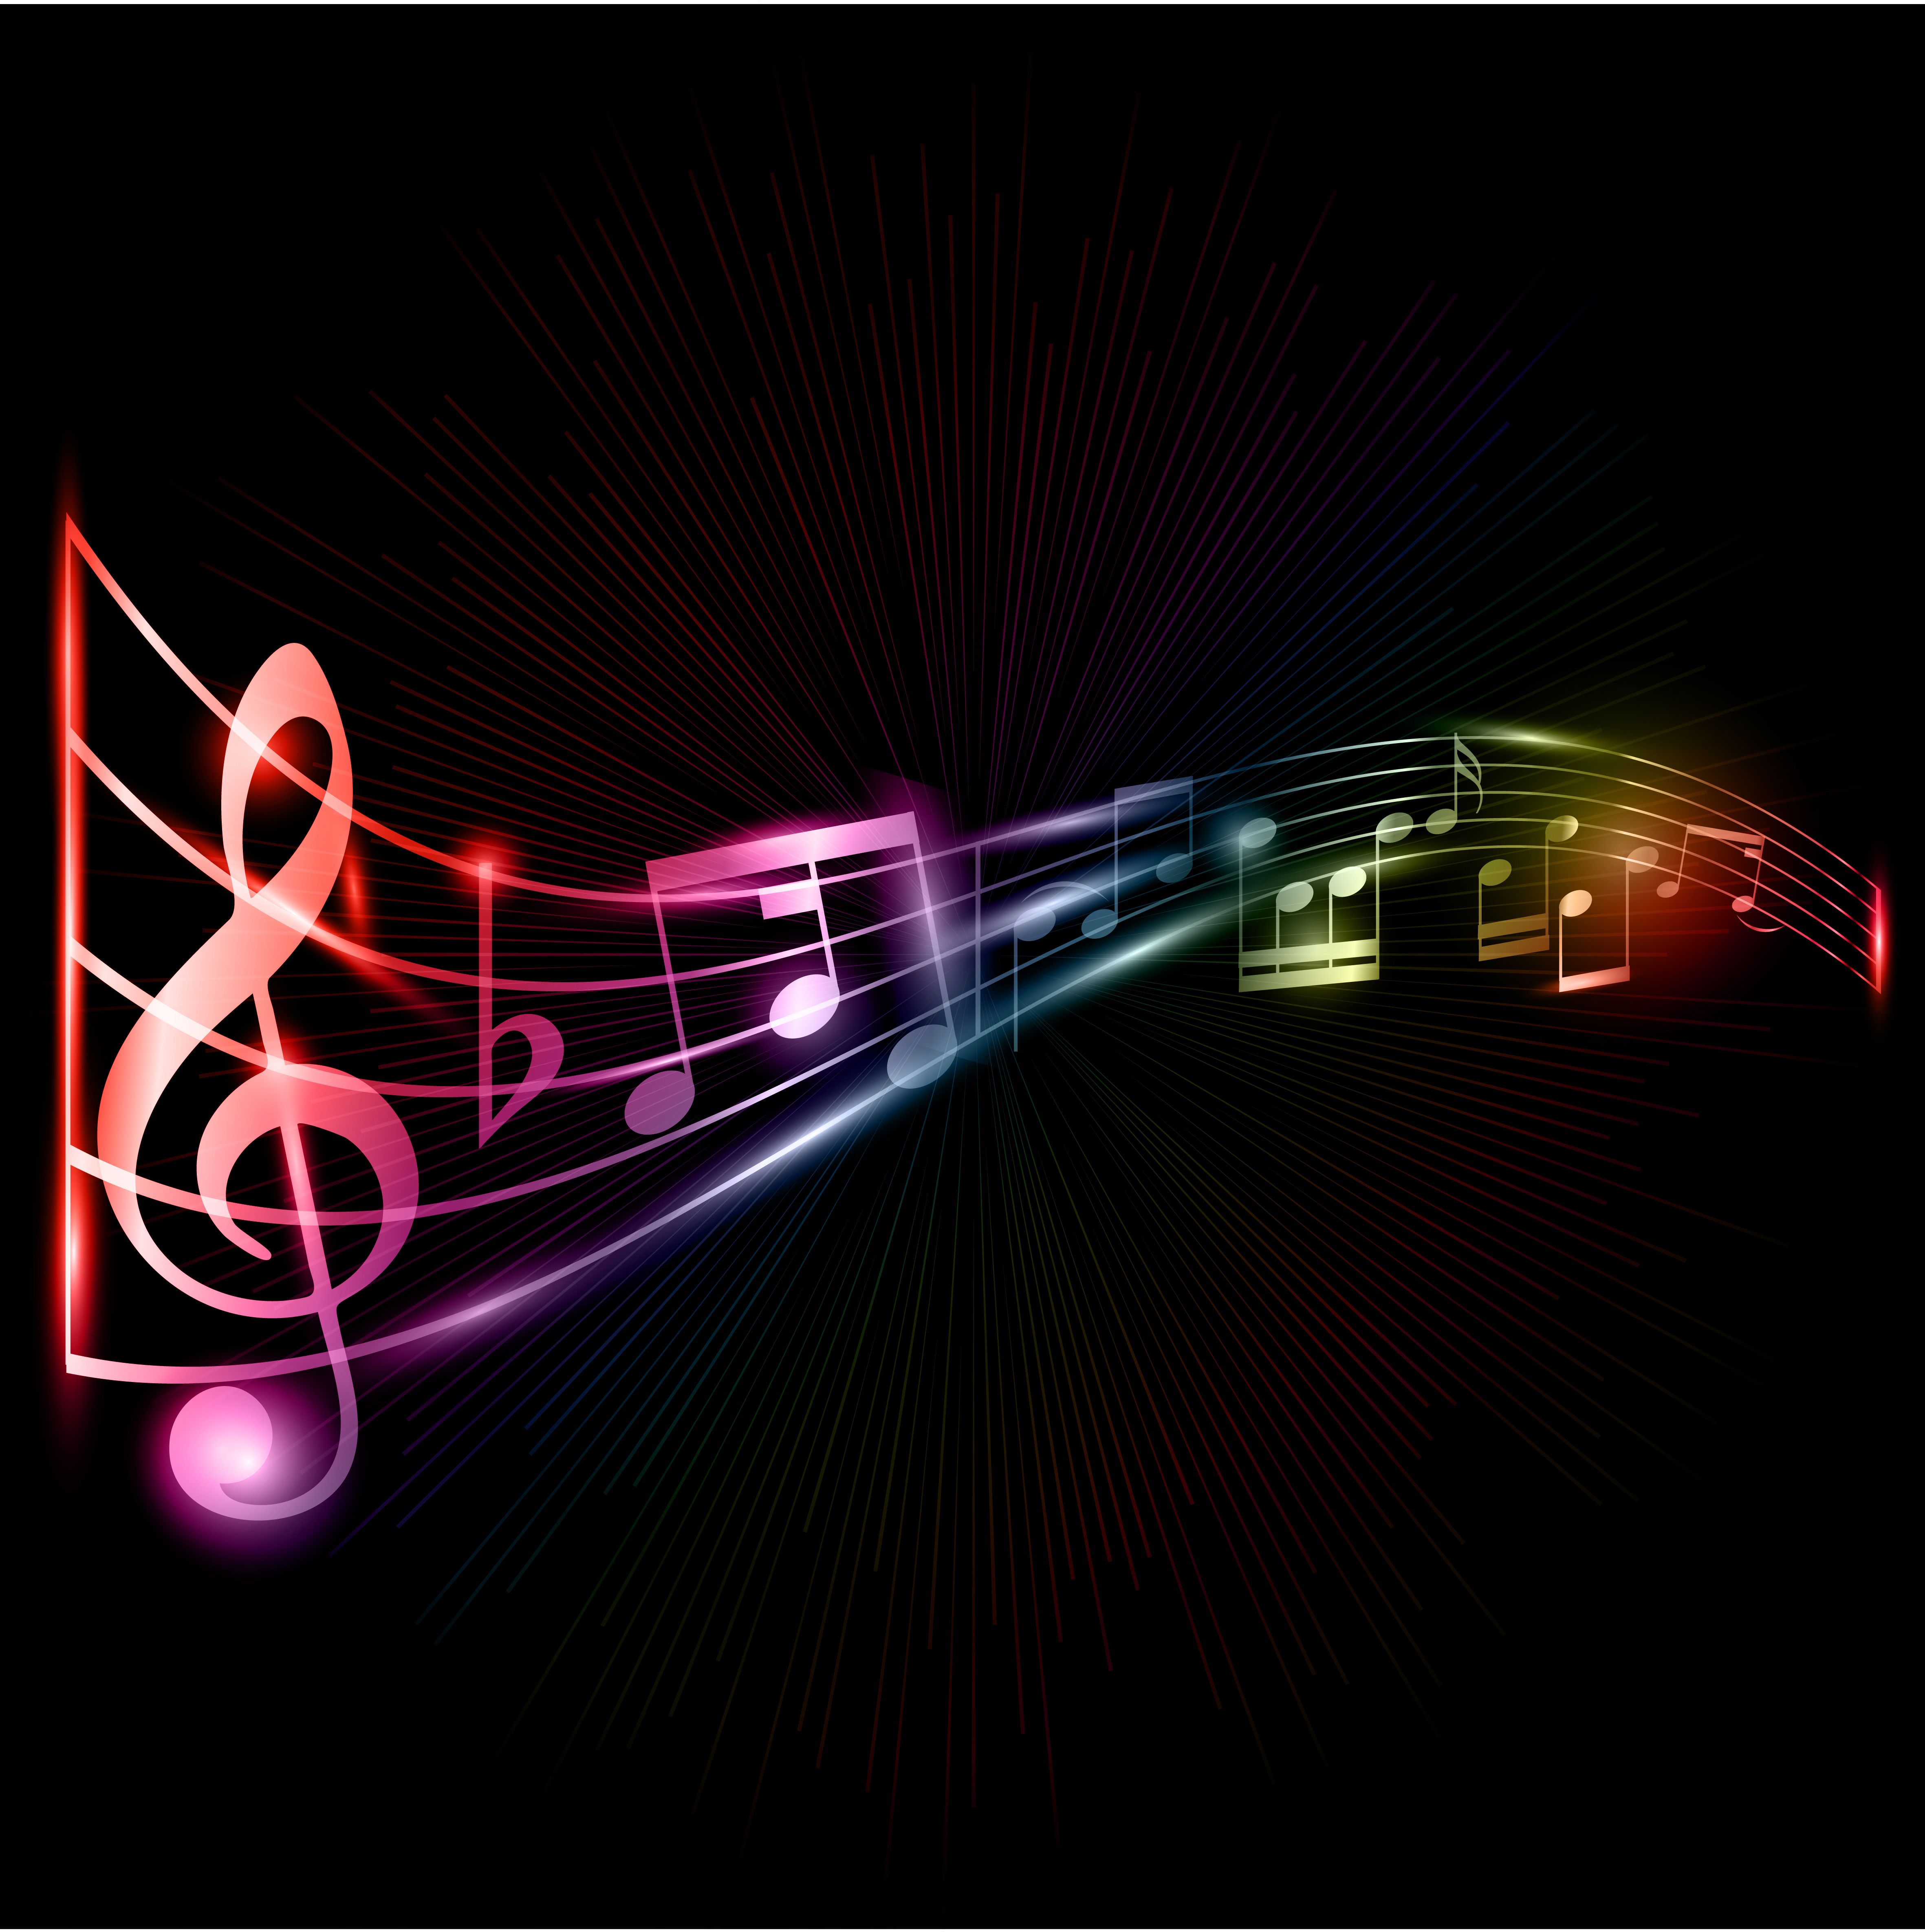 For Cool Musical Notes Background Displaying Image